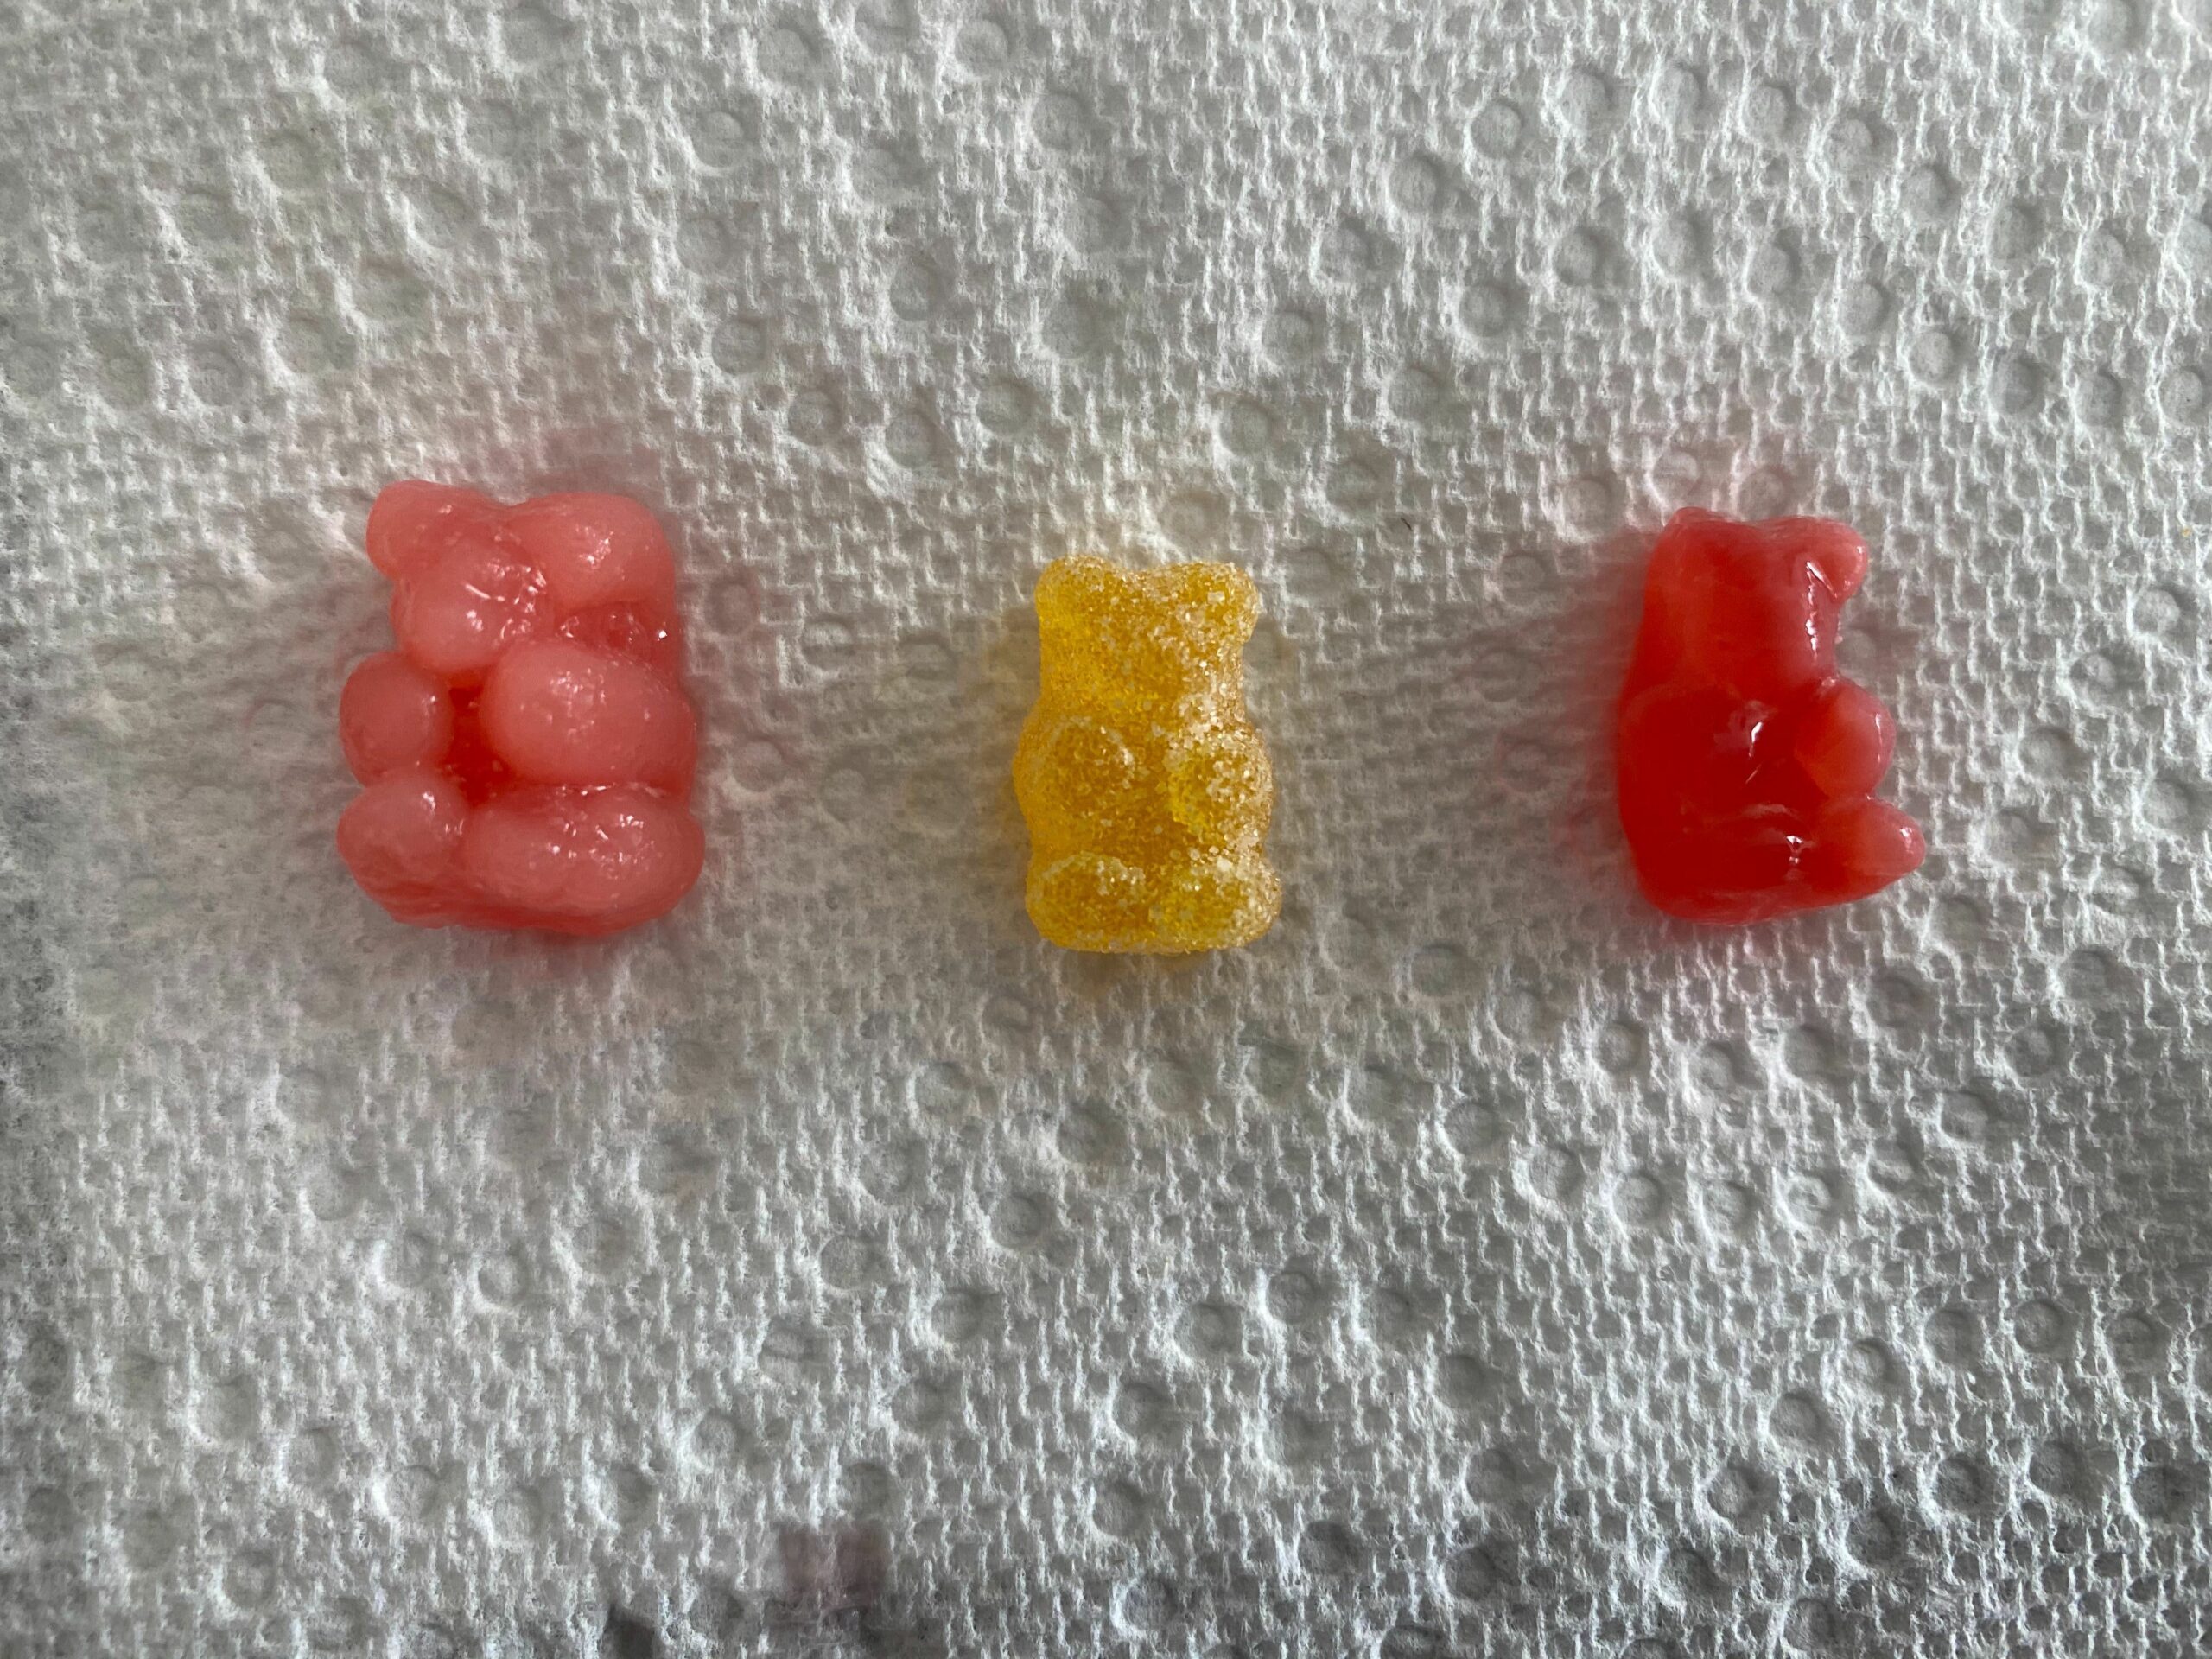 Stay-at-home science project: Enlarge gummy bears to reveal the secrets of osmosis